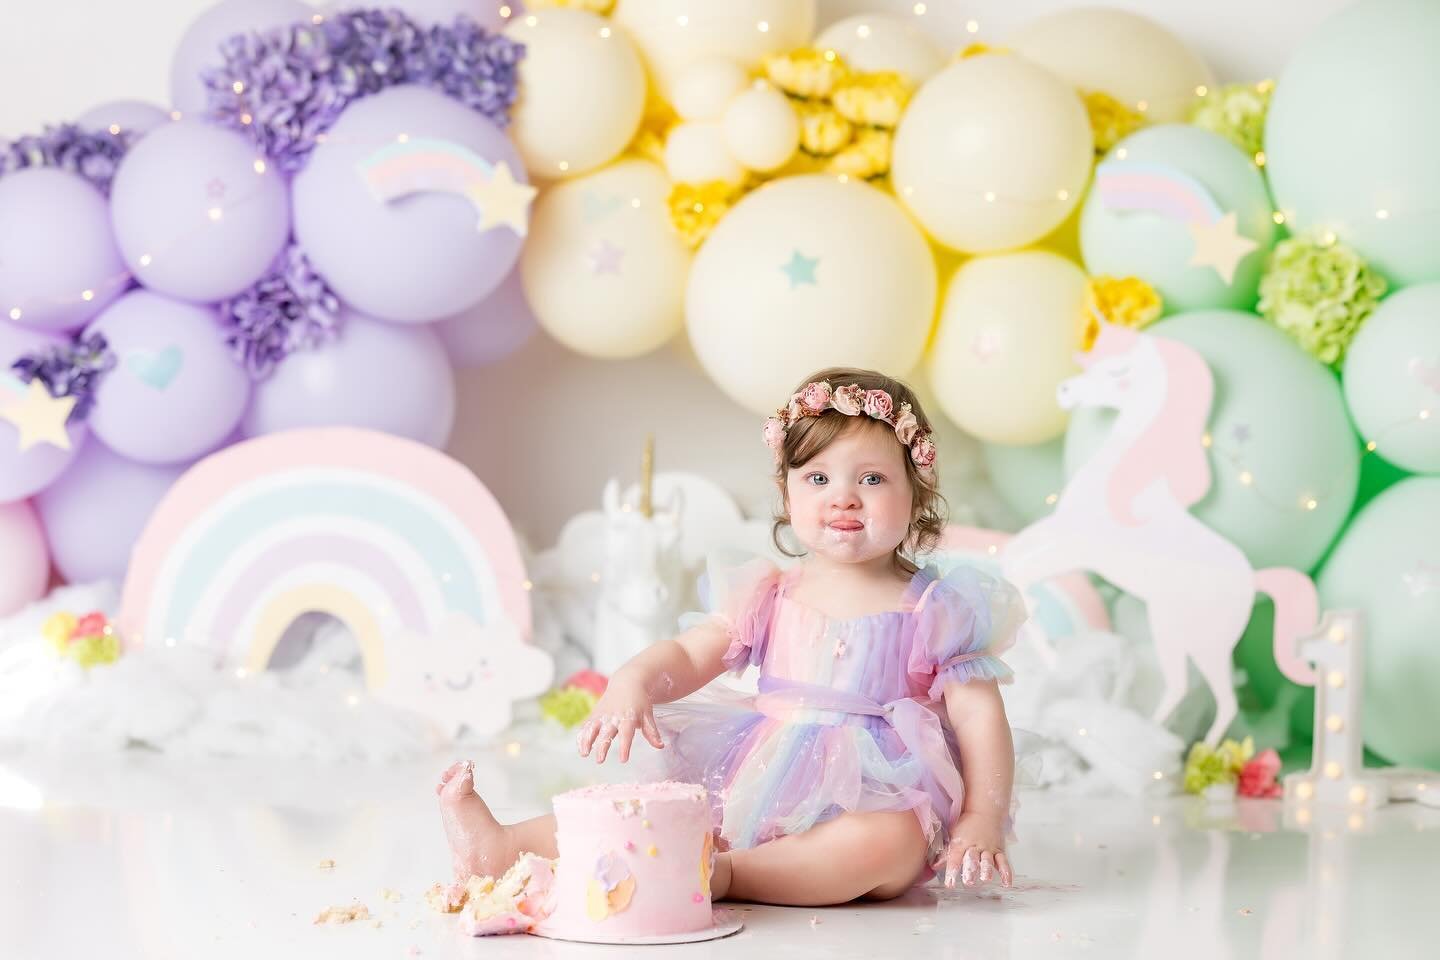 All rainbows 🌈 and unicorns 🦄 

Did you know? I provide all the props, cake, balloons, and even have some outfits available for use for your baby&rsquo;s cake smash session! These sessions are done between 11-12 months and to reserve your spot, ple